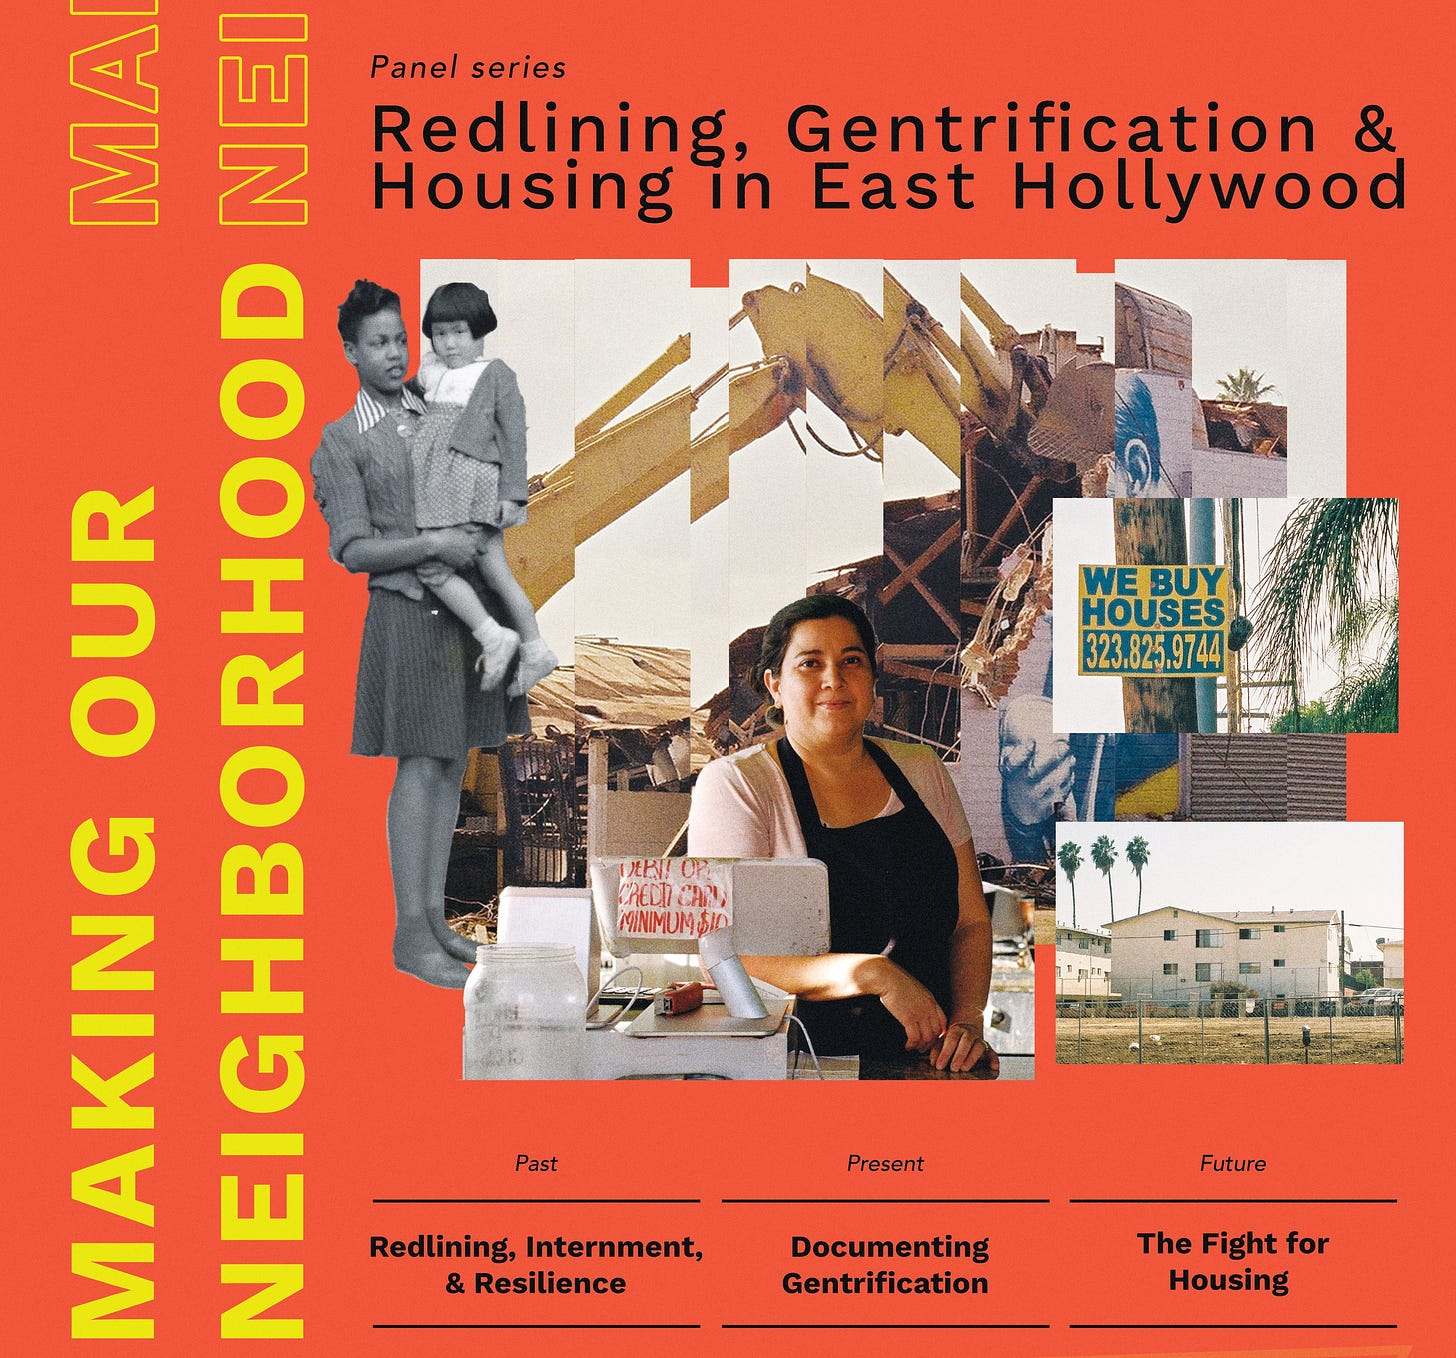 Magazine cover. Orange background with the words Making Our Neighborhood in yellow along the left hand side of the cover. On the top it says “panel series: Redlining, Gentrification, & Housing in East Hollywood.” In the middle are photographs of the neighborhood that have been sliced together. One image is archival black and white of a Black woman holding a Japanese child. Another is a contemporary photo portrait of a Salvadoran woman, and other photos are of buildings in the neighborhood. The bottom of the cover has three columns of text that say “Past Present Future” and below those it says “Redlining, Internment, & Resilience; Documenting Gentrification; the fight for housing.”